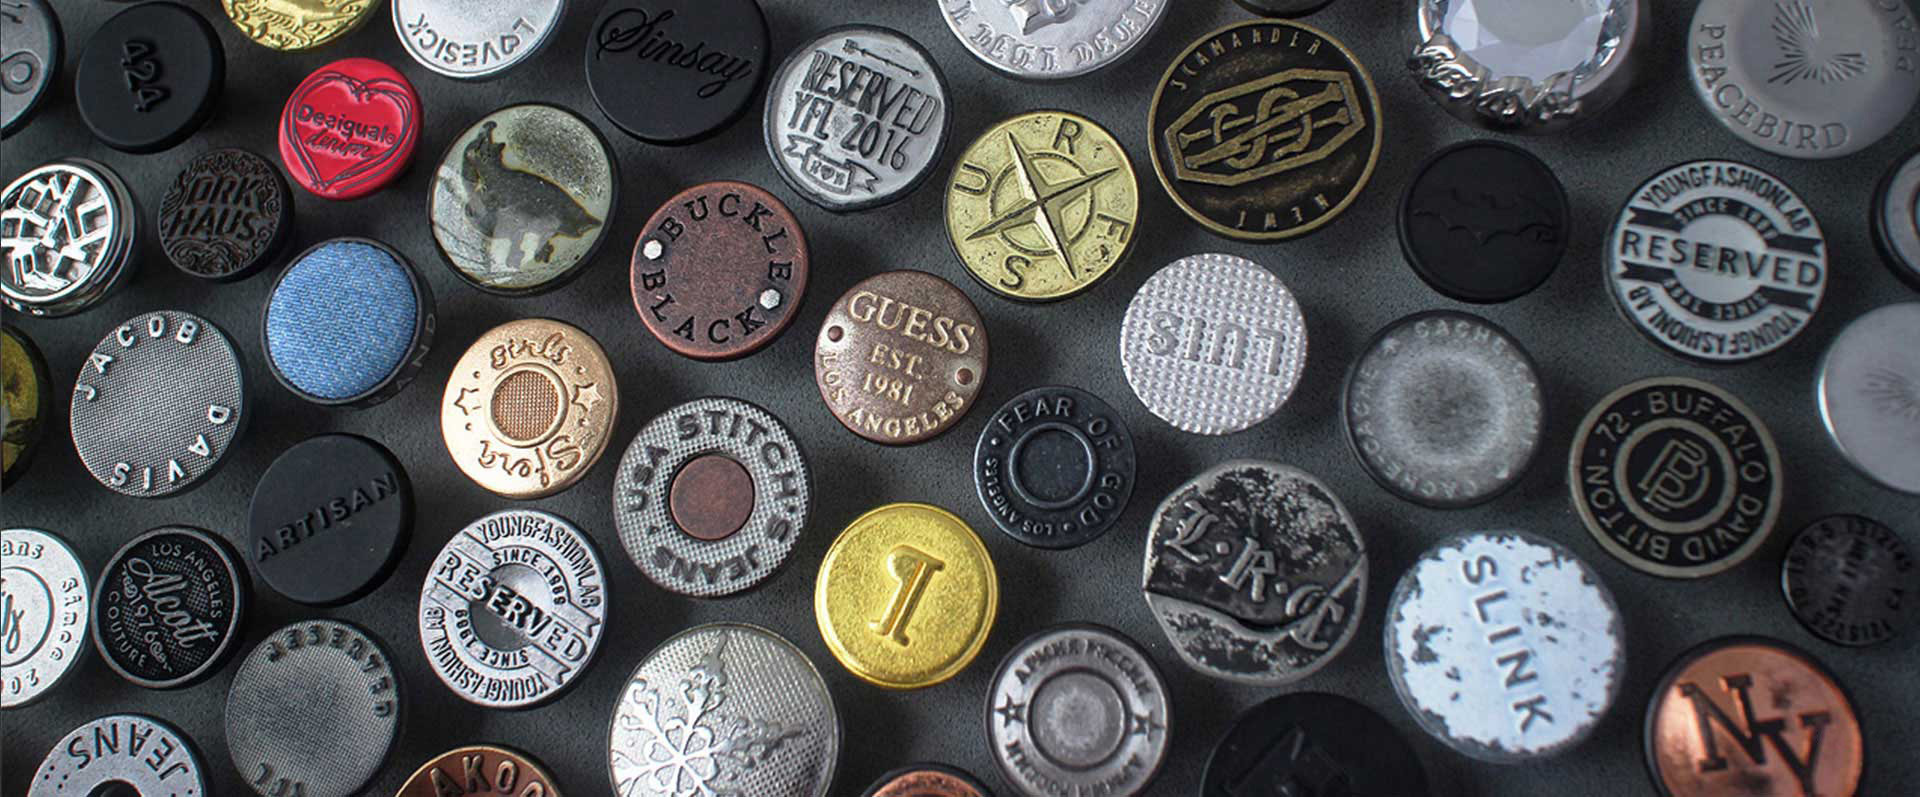 Leading manufacturer in buttons